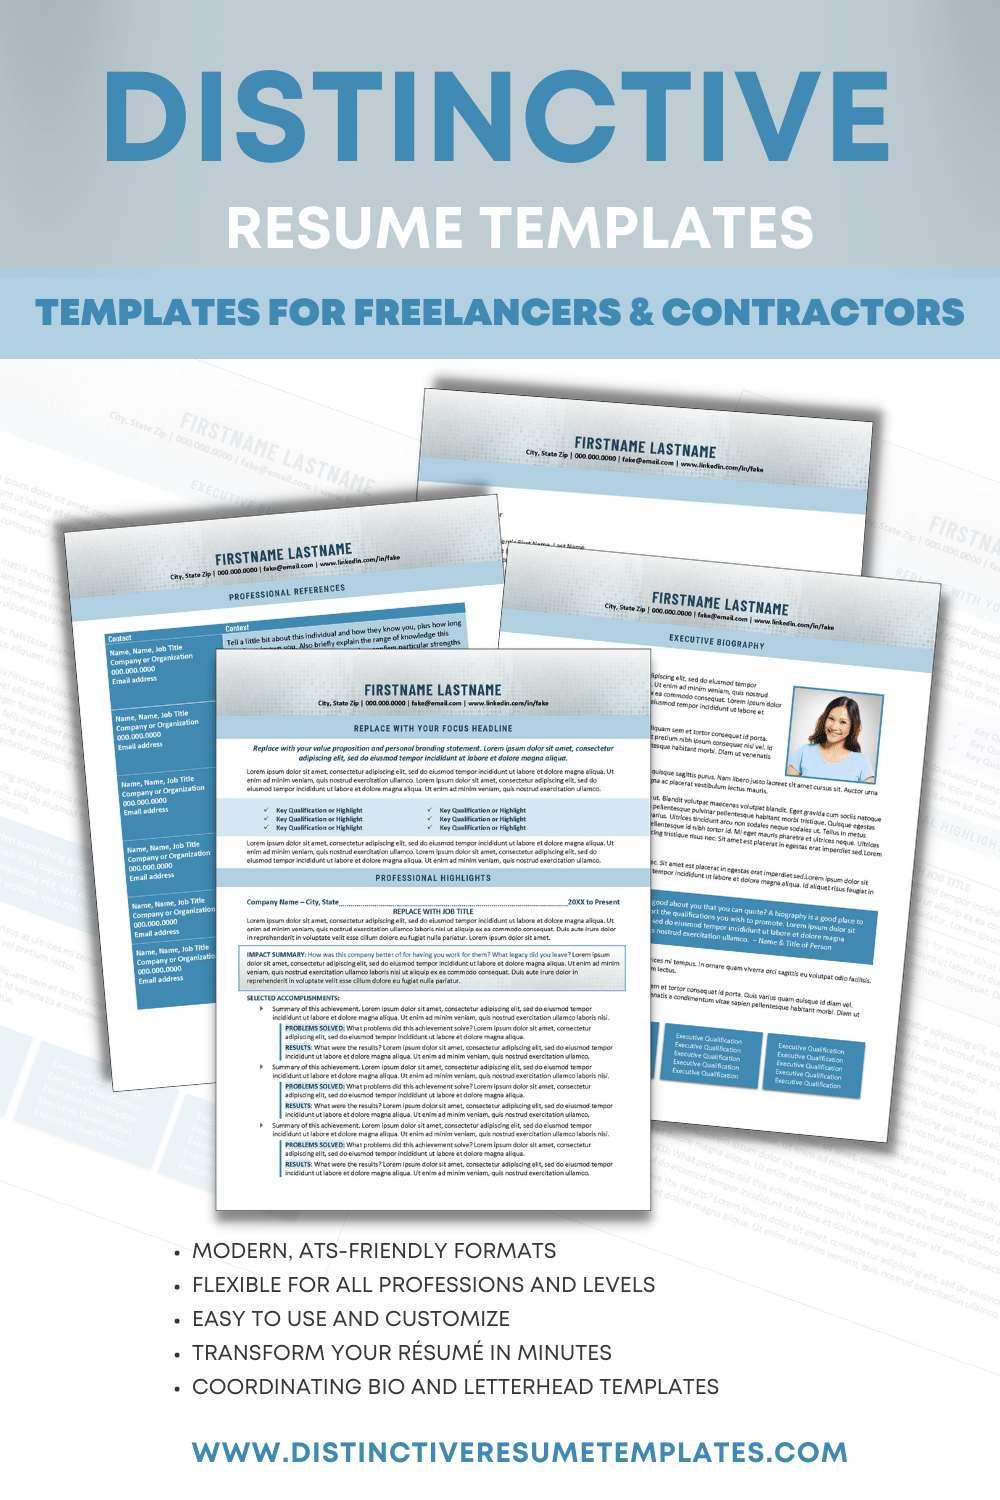 MS Word Resume Template for Freelancers